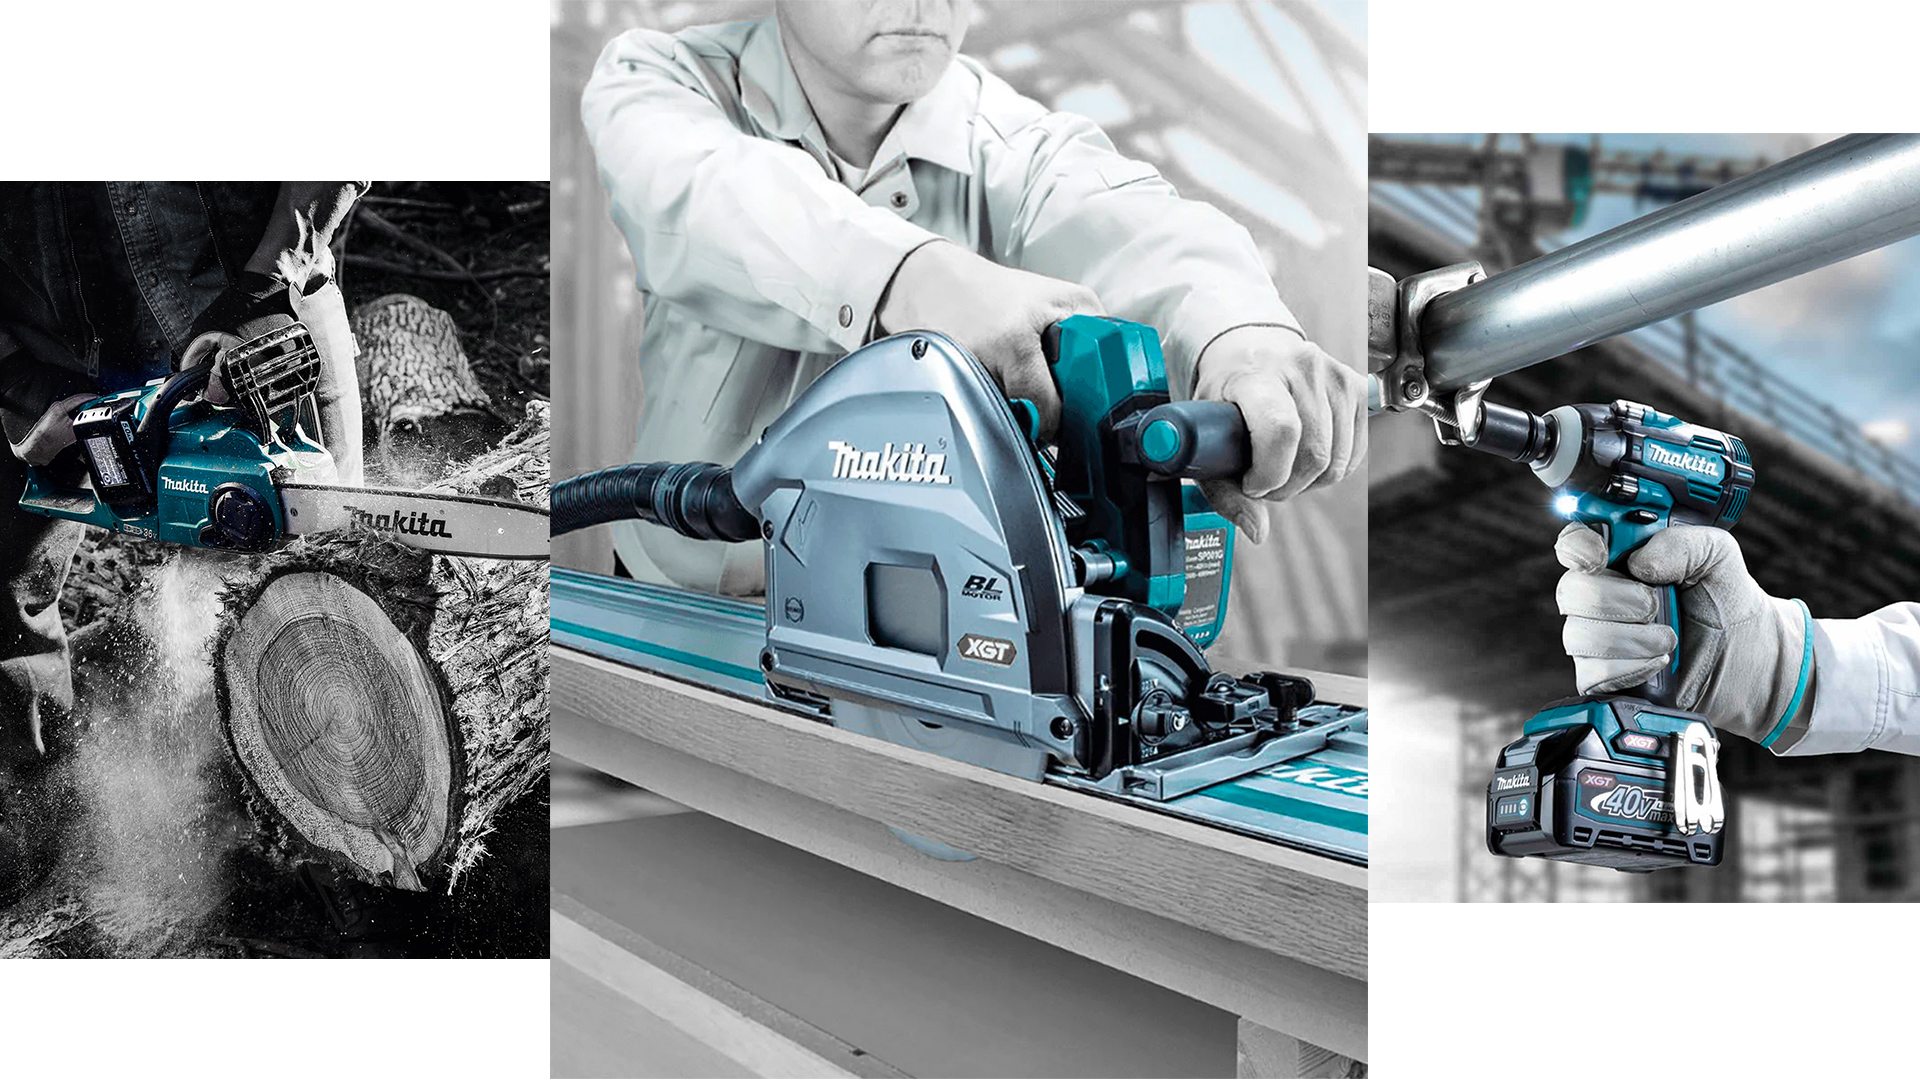 Trade Counter Direct Now Stocking Makita Power Tools